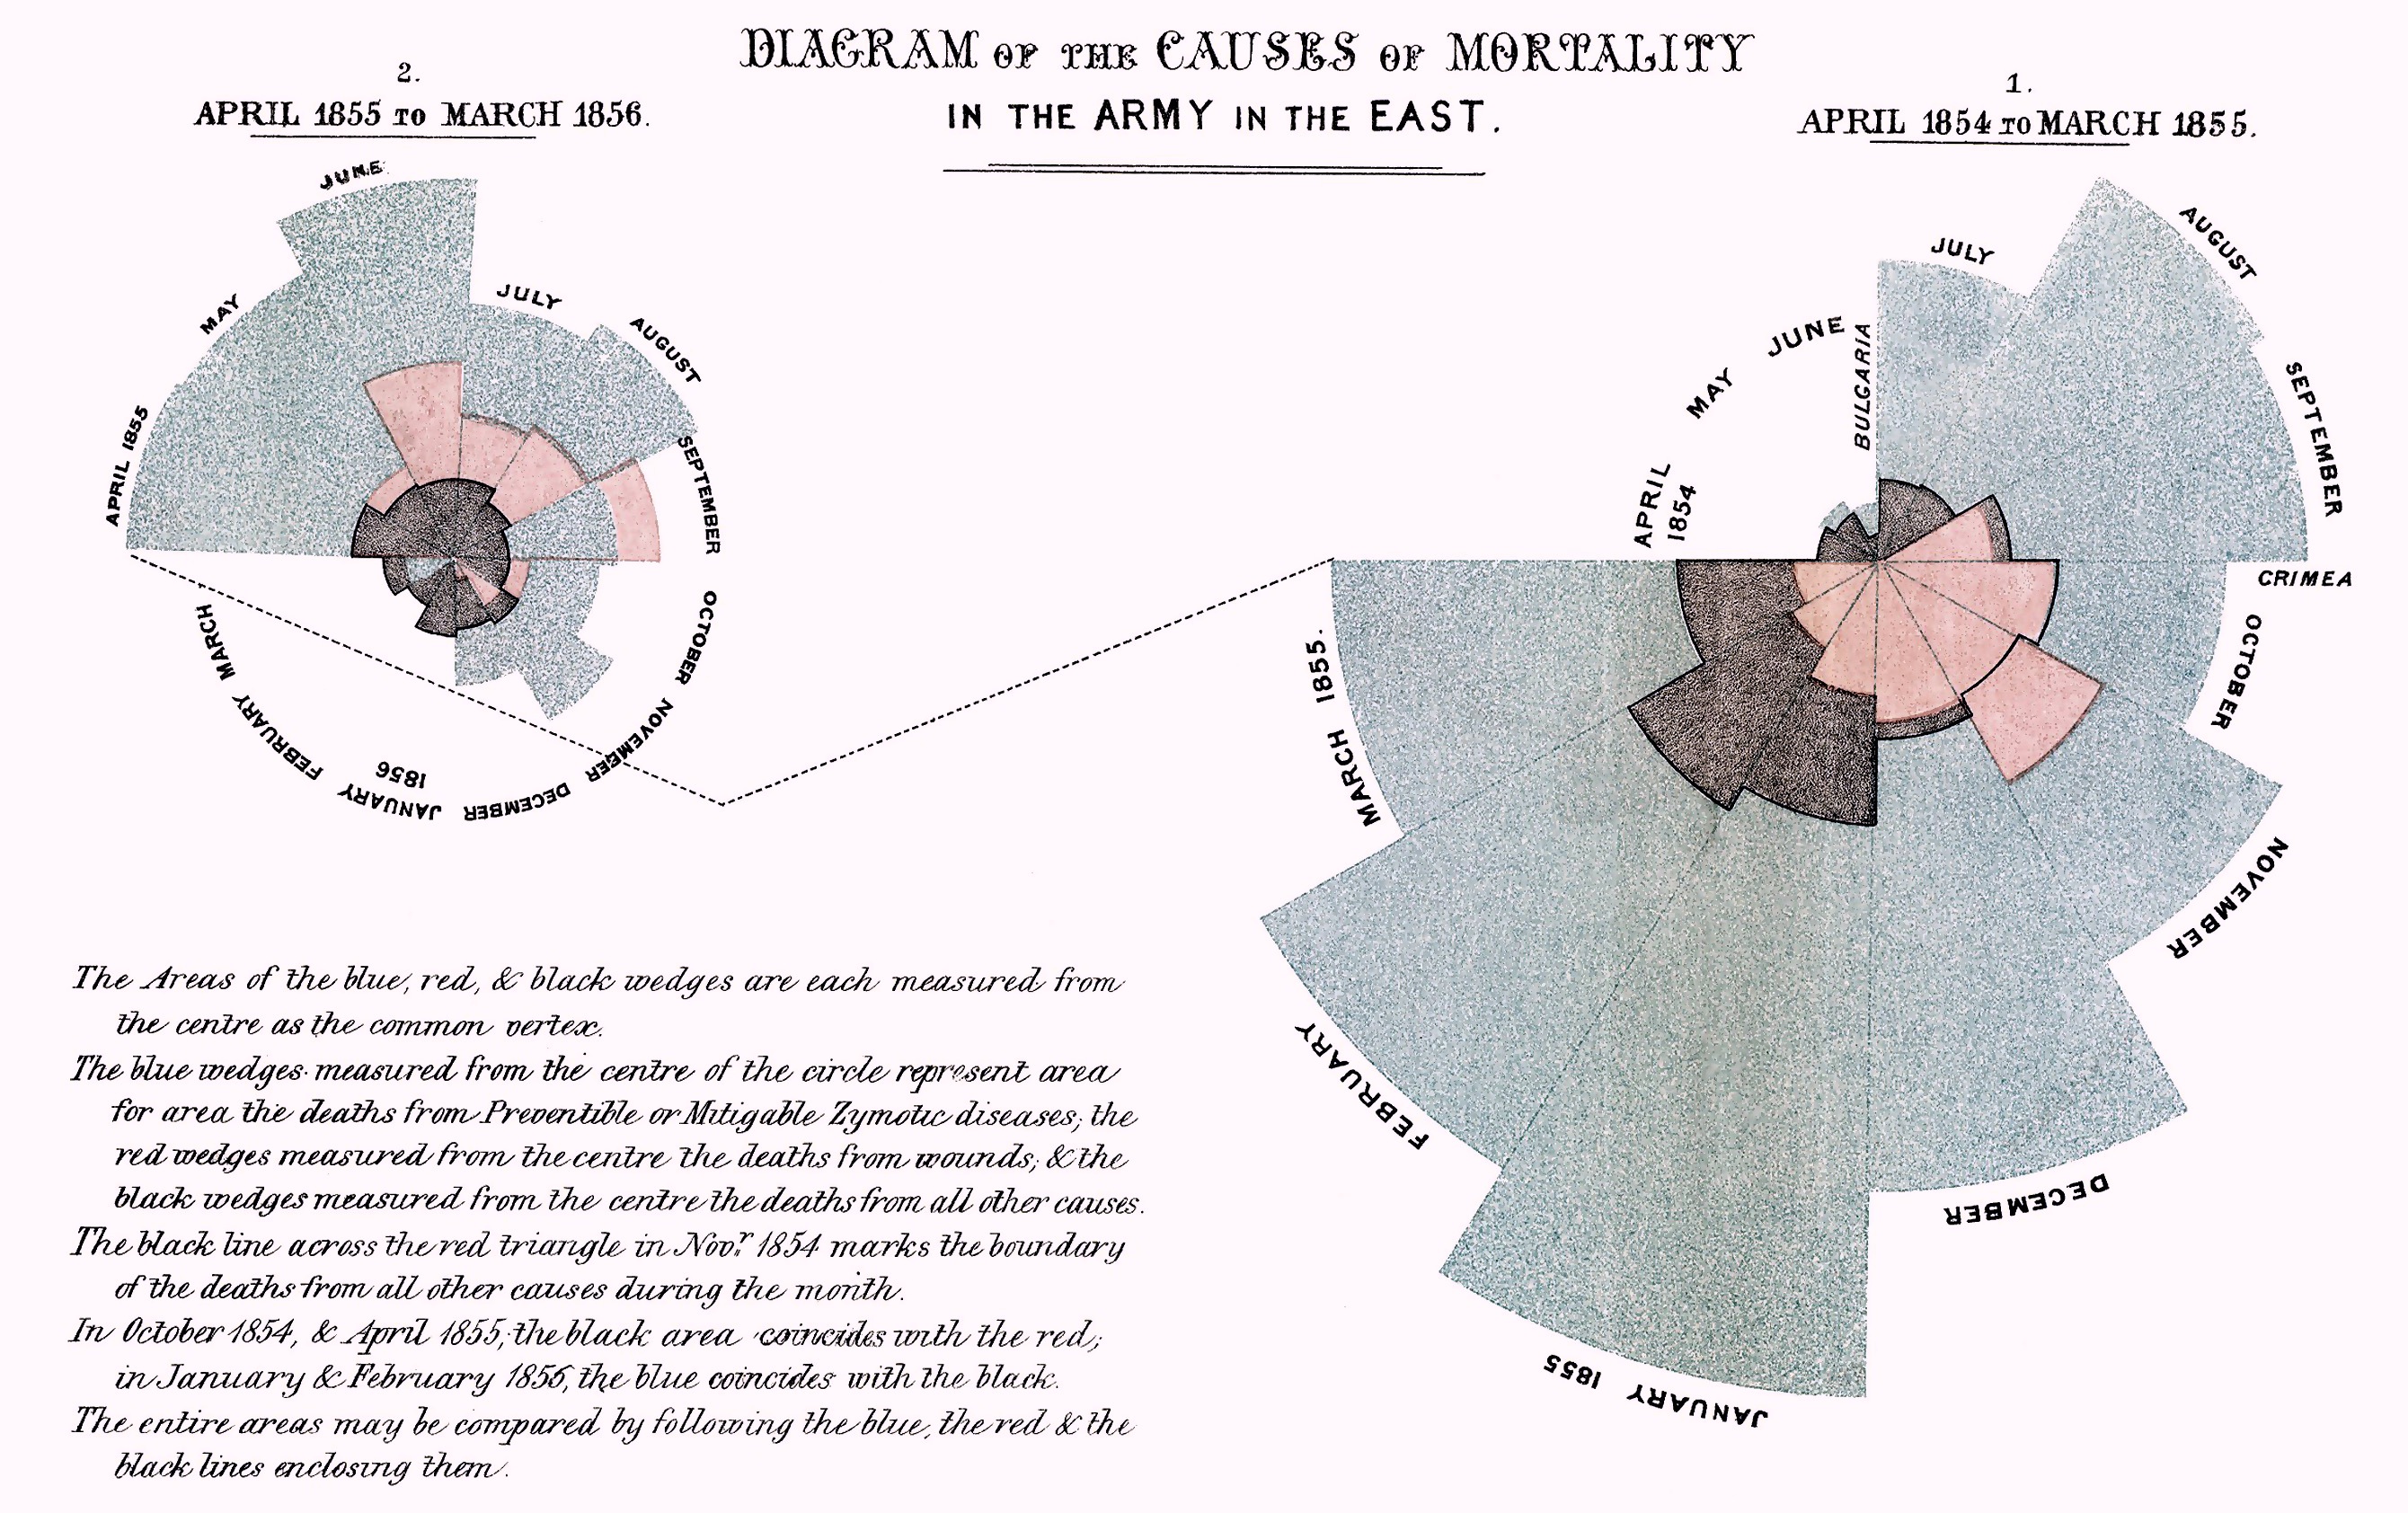 Nightingale mortality diagram: A radial diagram showing the number of deaths from preventible zymotic diseases (outer, blue wedges) compared with deaths from wounds (red) and from all other causes (gray). Right: data for April 1854 to March 1855; left: data for April 1855 to March 1865 after the arrival of the Sanitary Commission.